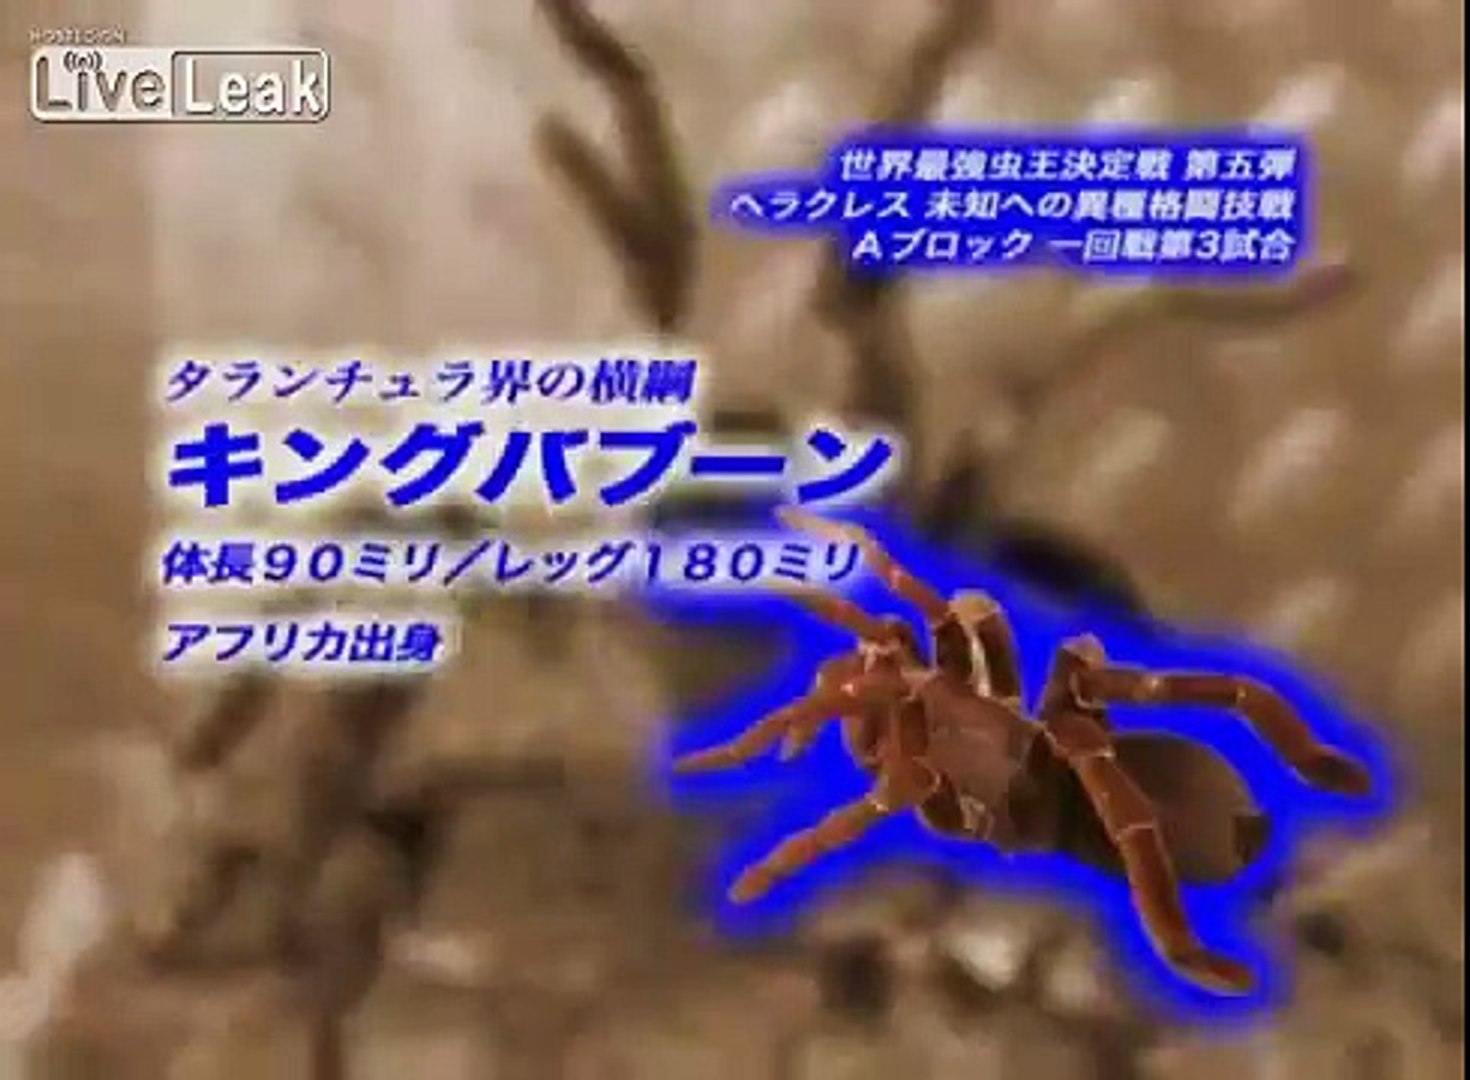 Hercules Beetle Vs Tarantula Spider Part 2 The Rematch Video Dailymotion